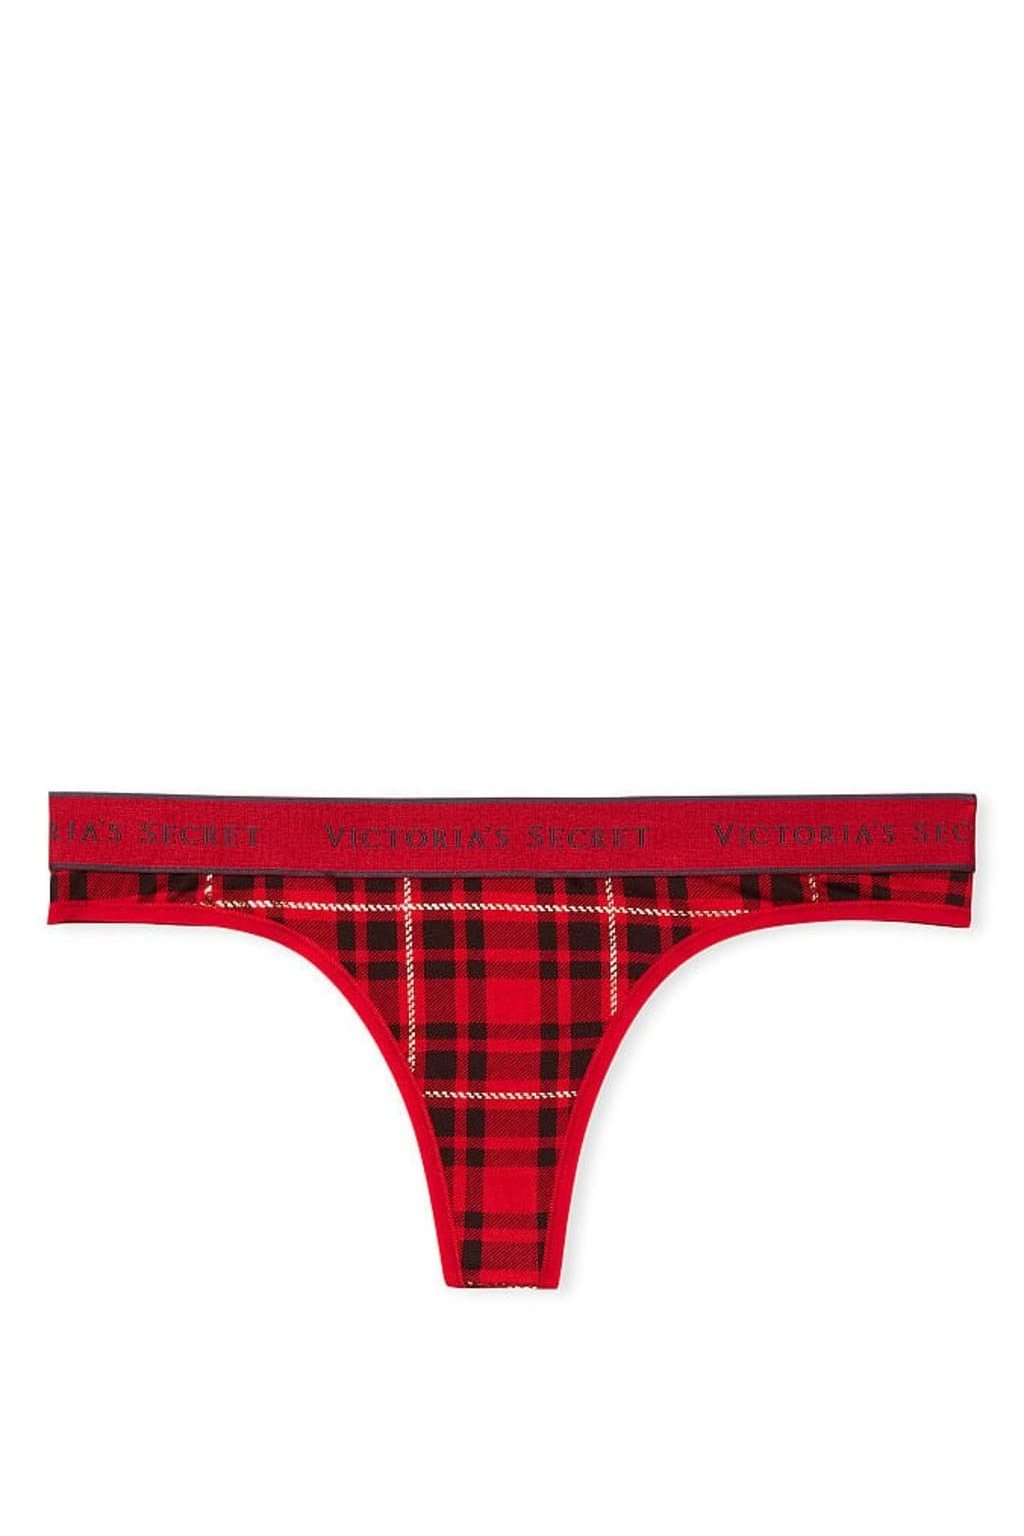 Tangá Victoria's Secret Cotton red holly plaid